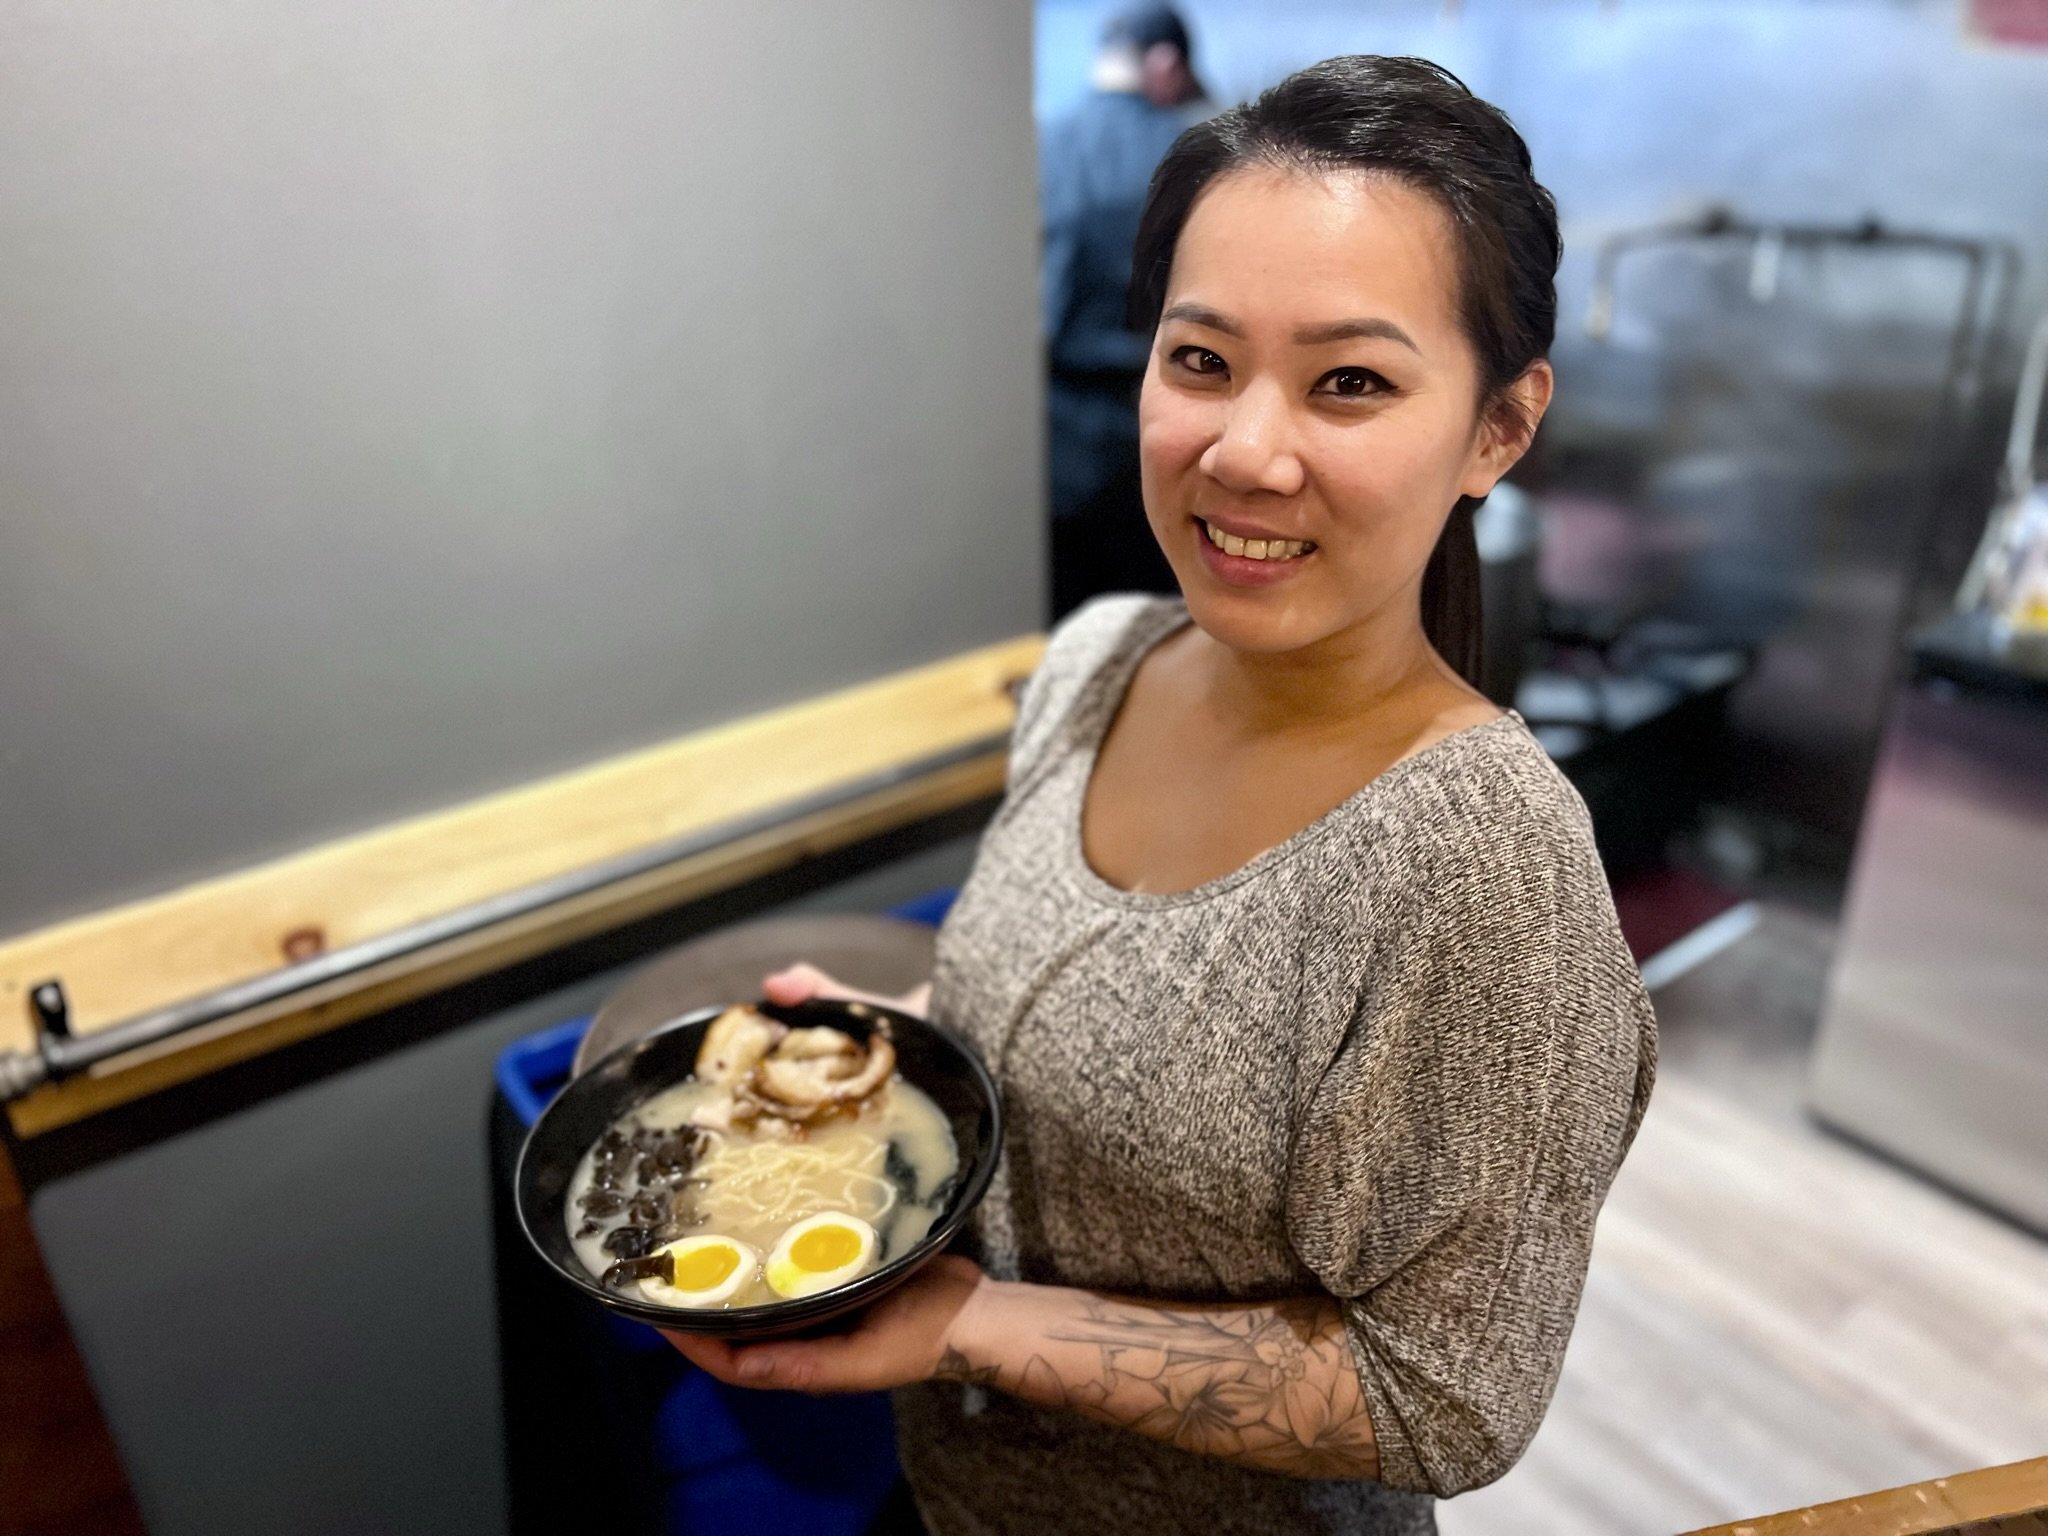 Owner Susan Tung holding a bowl of Shoyu Ramen consisting of ramen noodles, a soft-boiled egg, chashu pork, woodear mushrooms, bean sprouts and onions. All photos by David Tuan Bui.